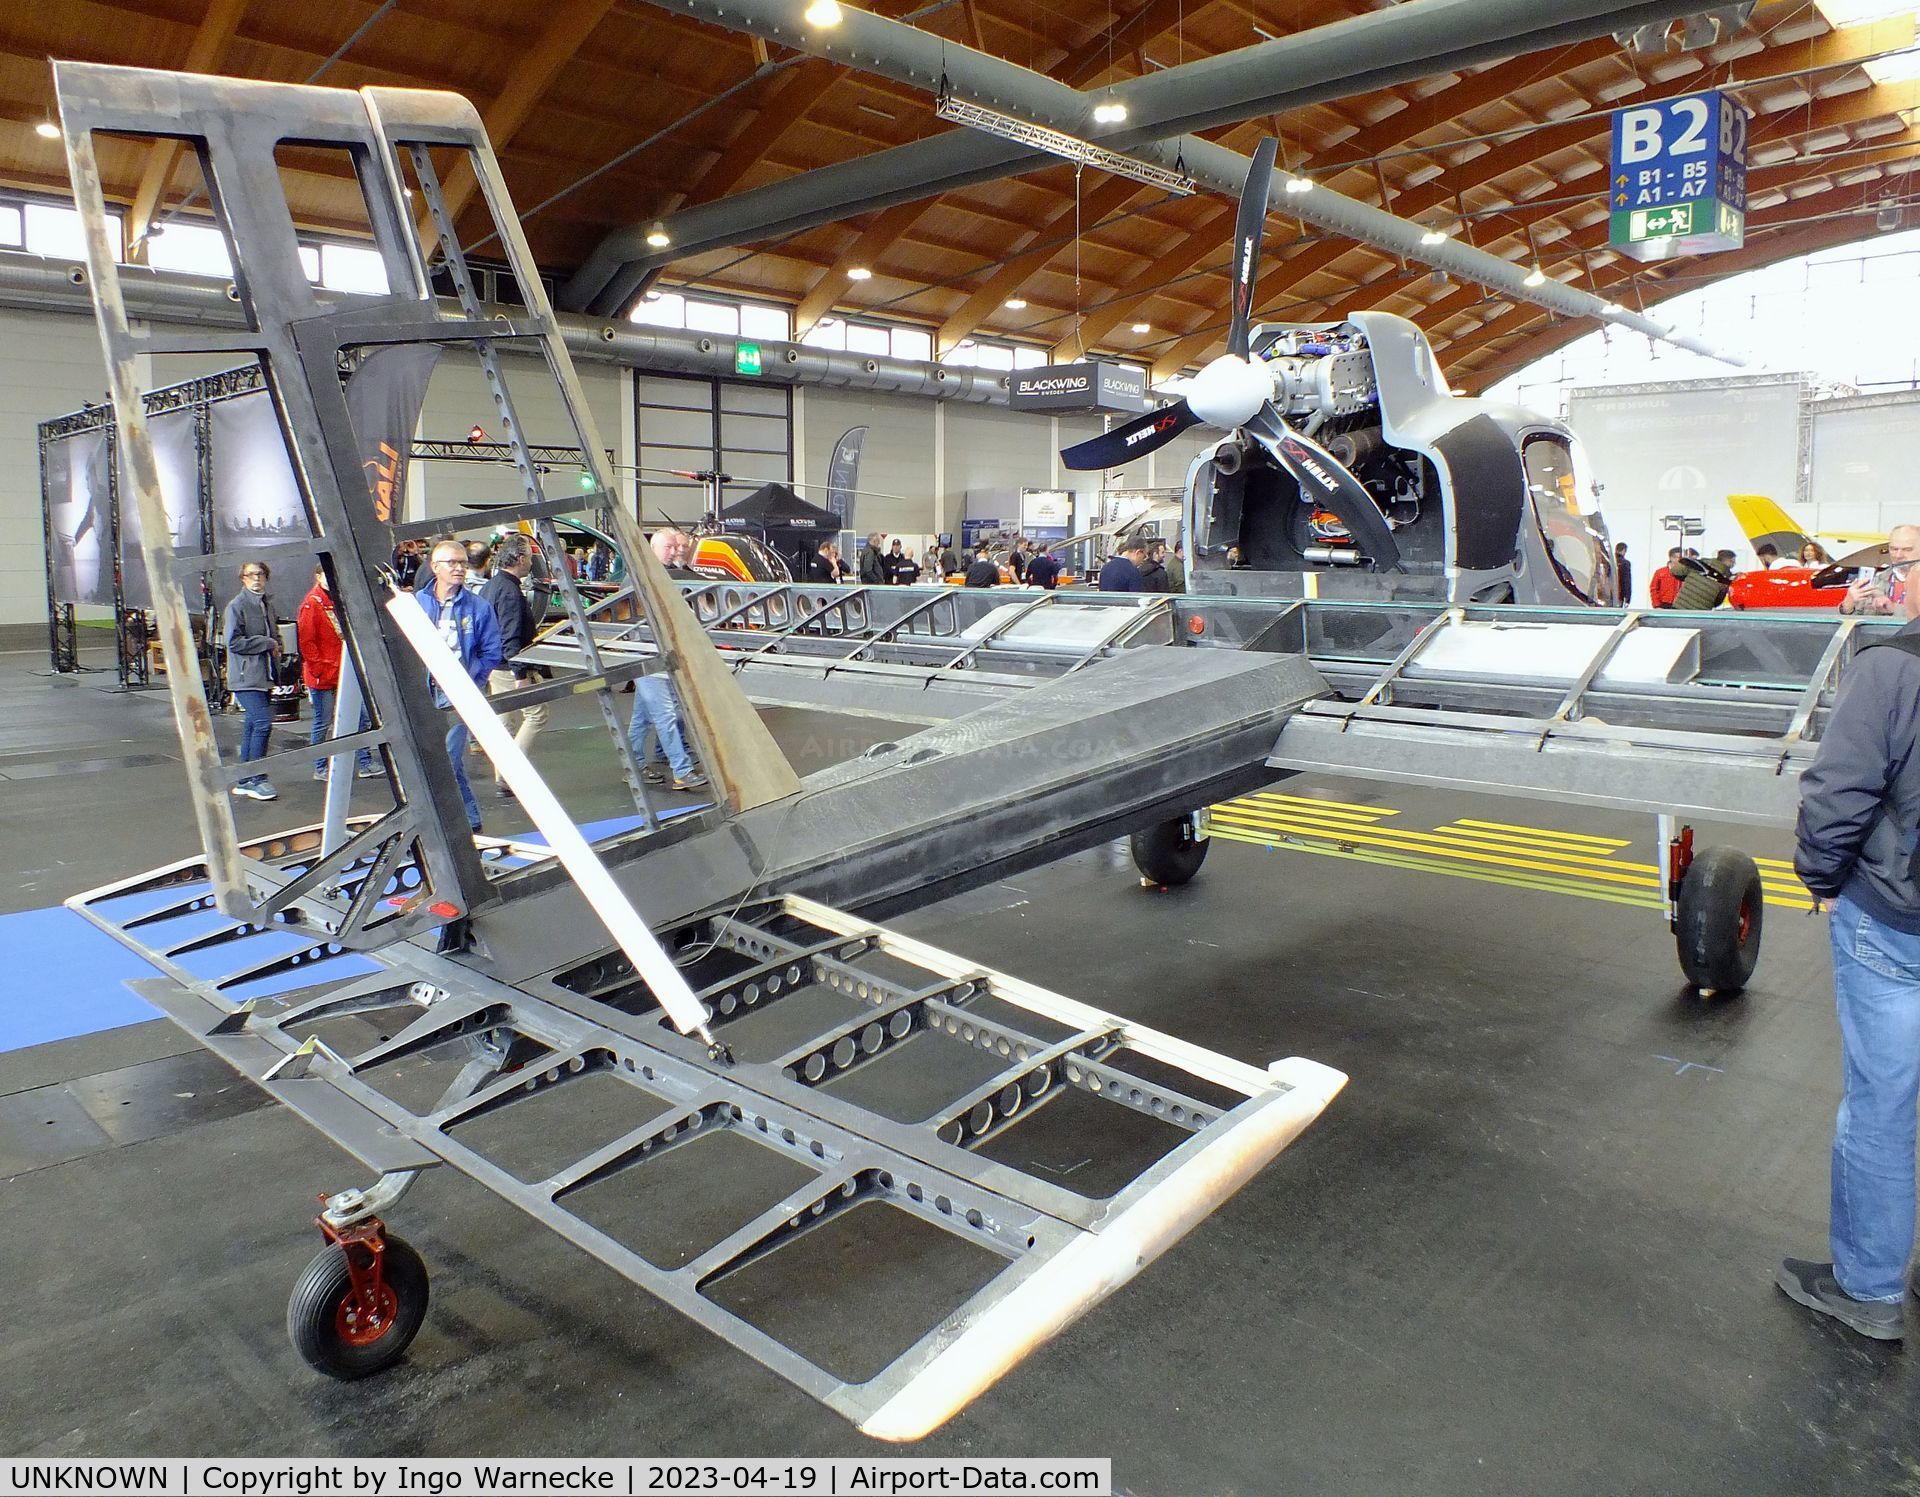 UNKNOWN, 2023 Airconcept Observer C/N 01, Airconcept Observer prototype (still incomplete) at the AERO 2023, Friedrichshafen